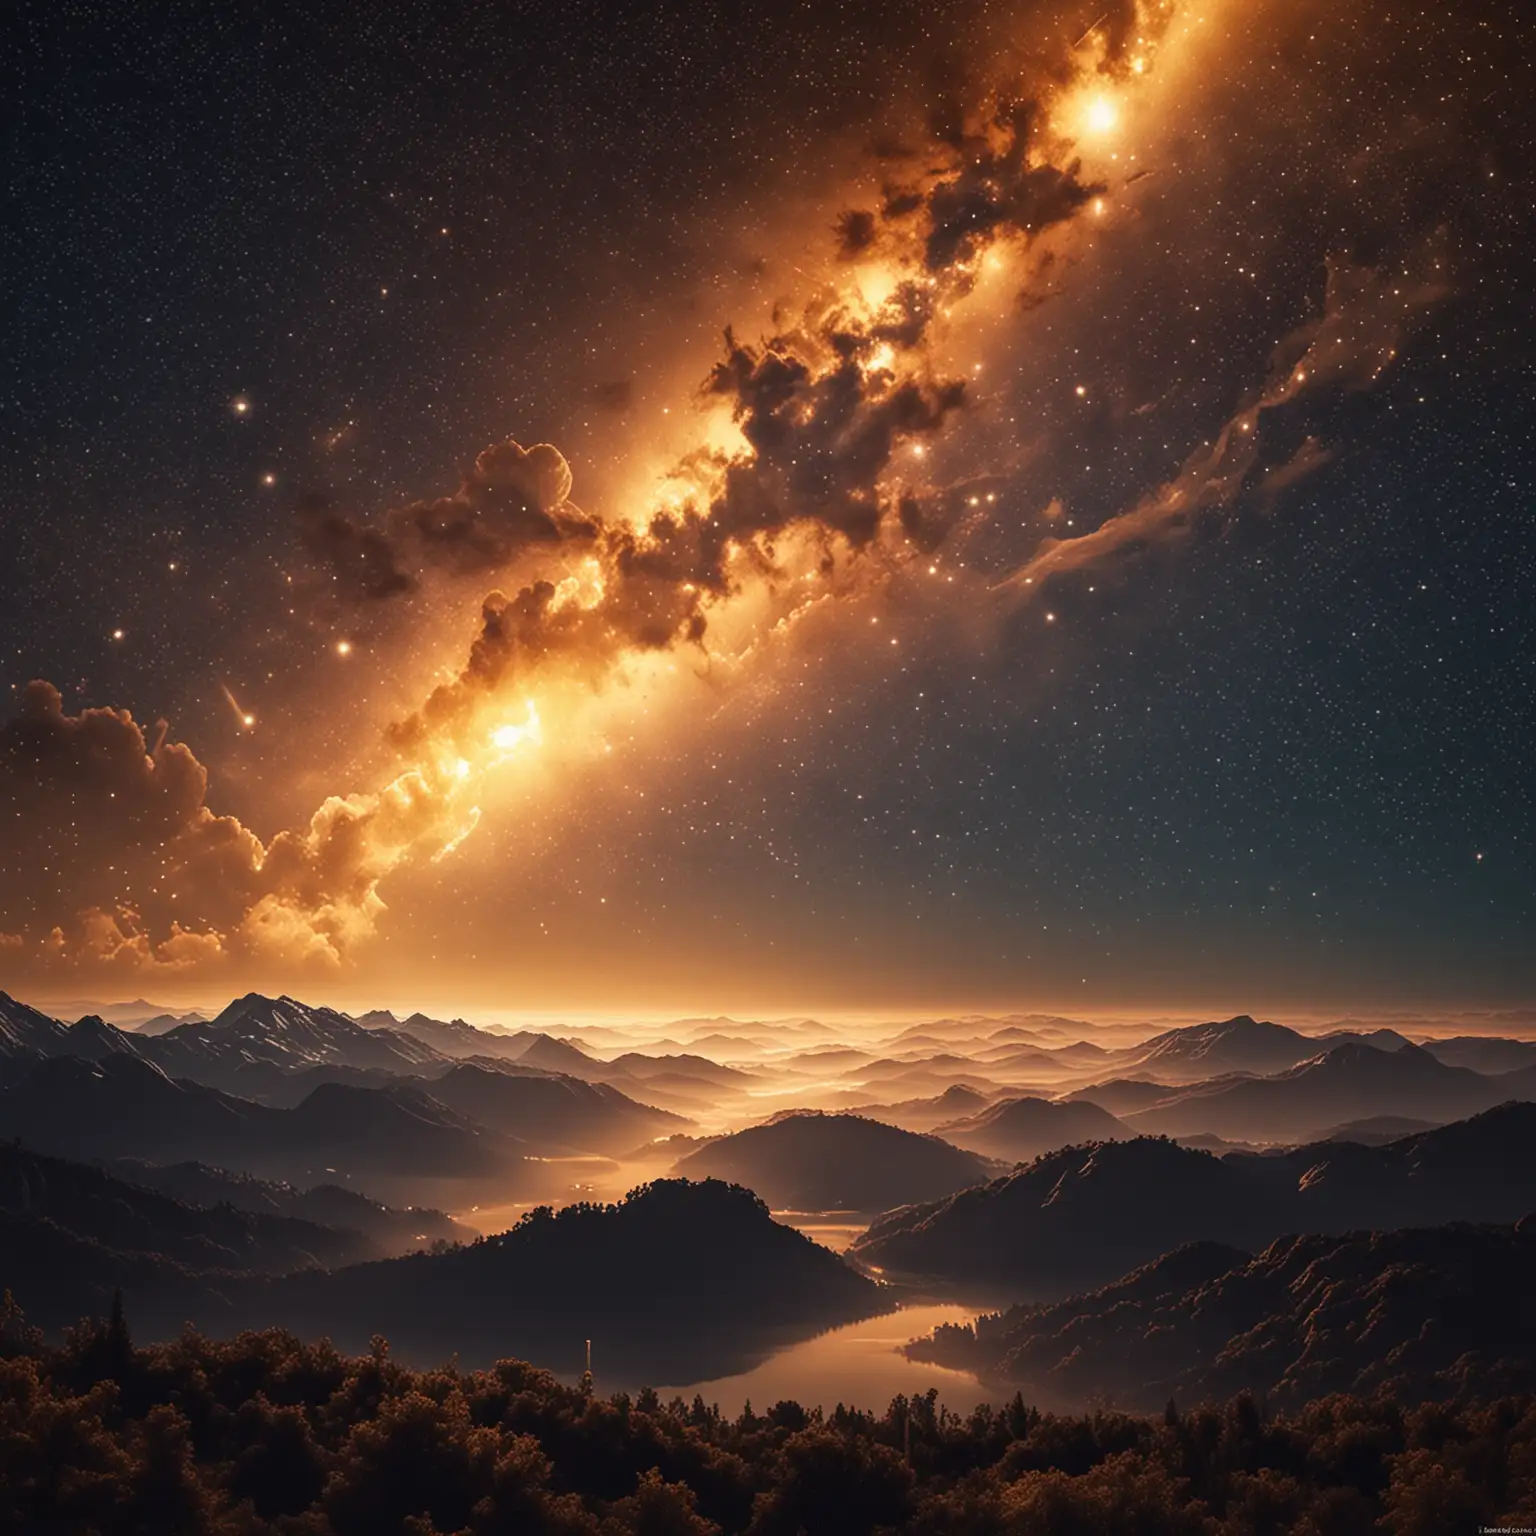 create an image that depicts a night sky with golden light effects